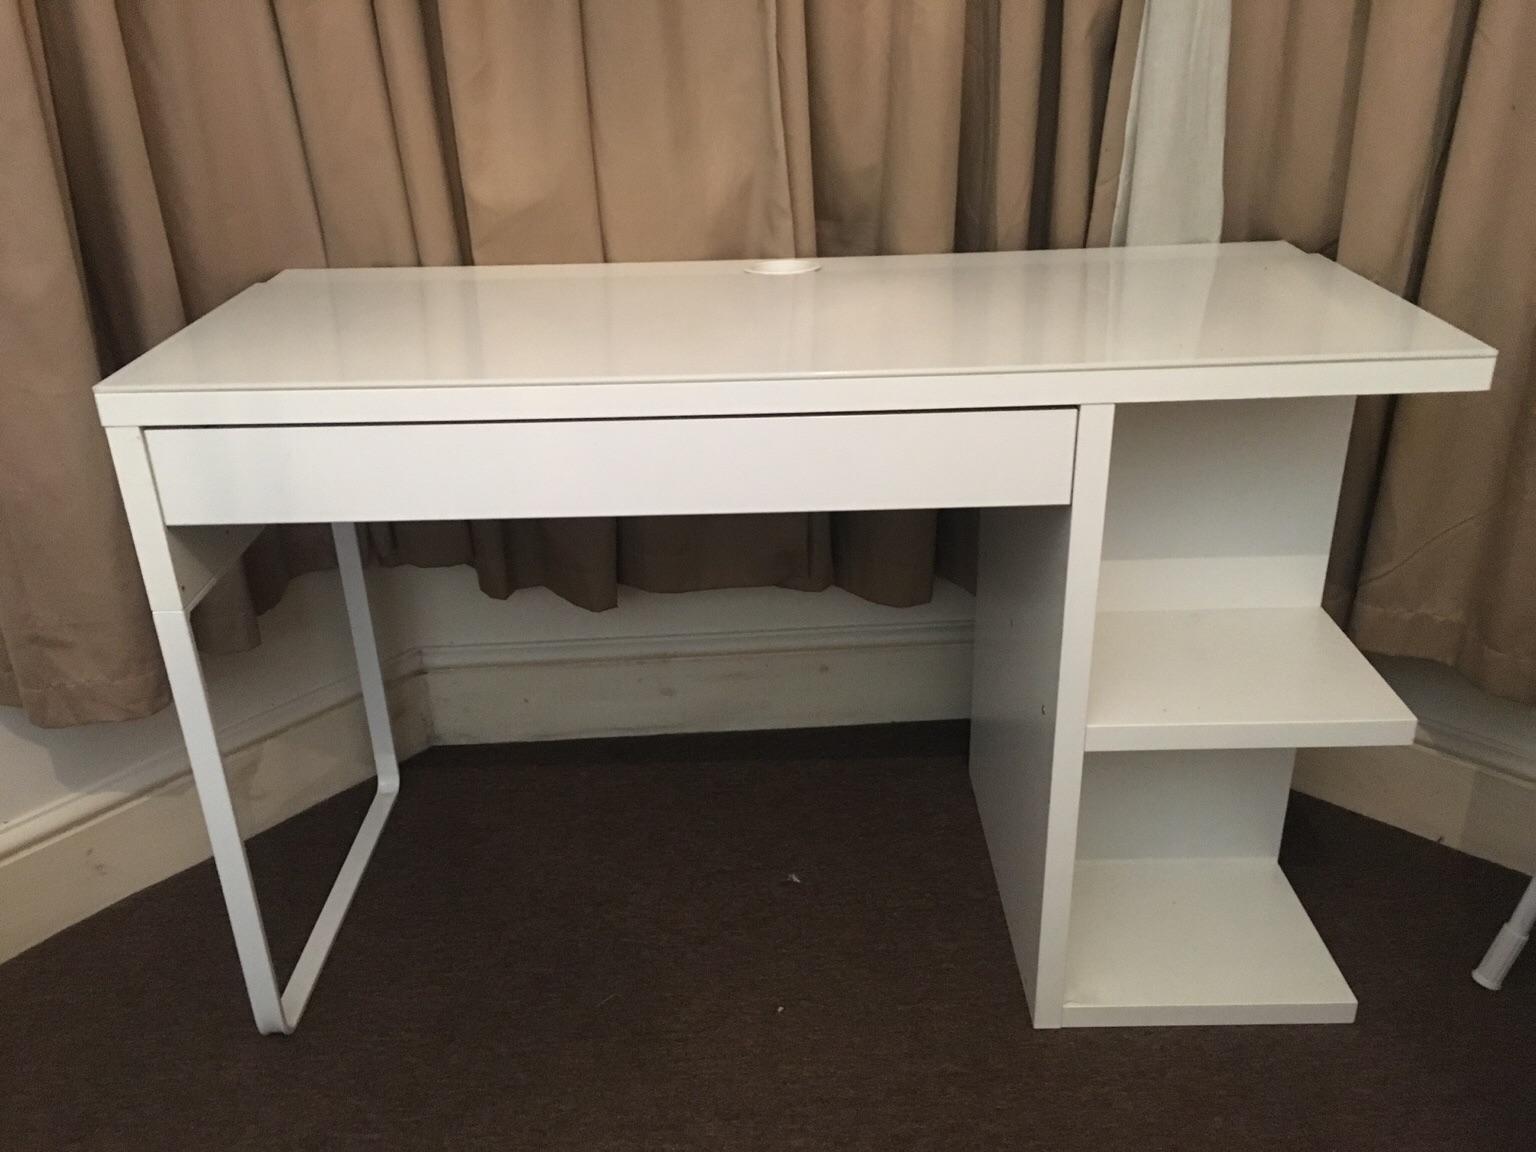 Ikea Micke Desk With Integrated Storage In E11 London For 25 00